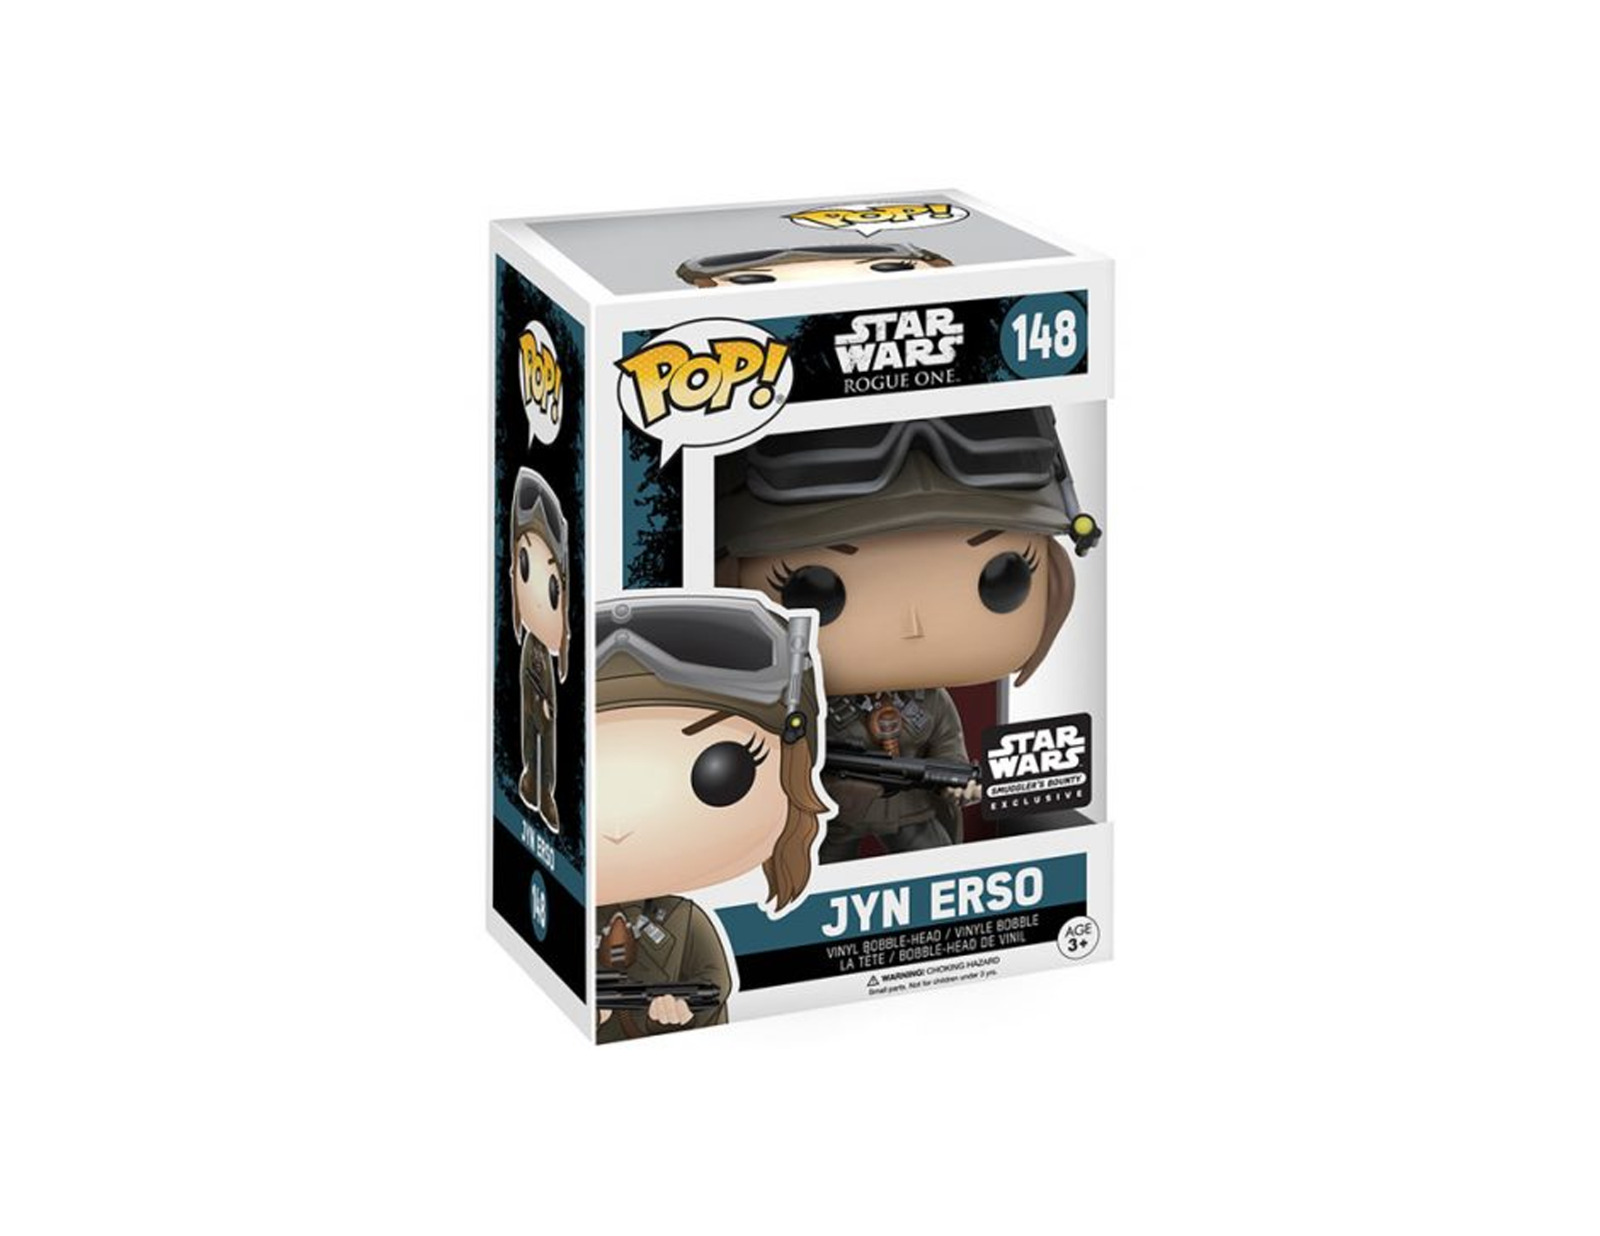 Funko POP Star Wars - Rogue One - Jyn Erso #148 with Soft Protector (B15)